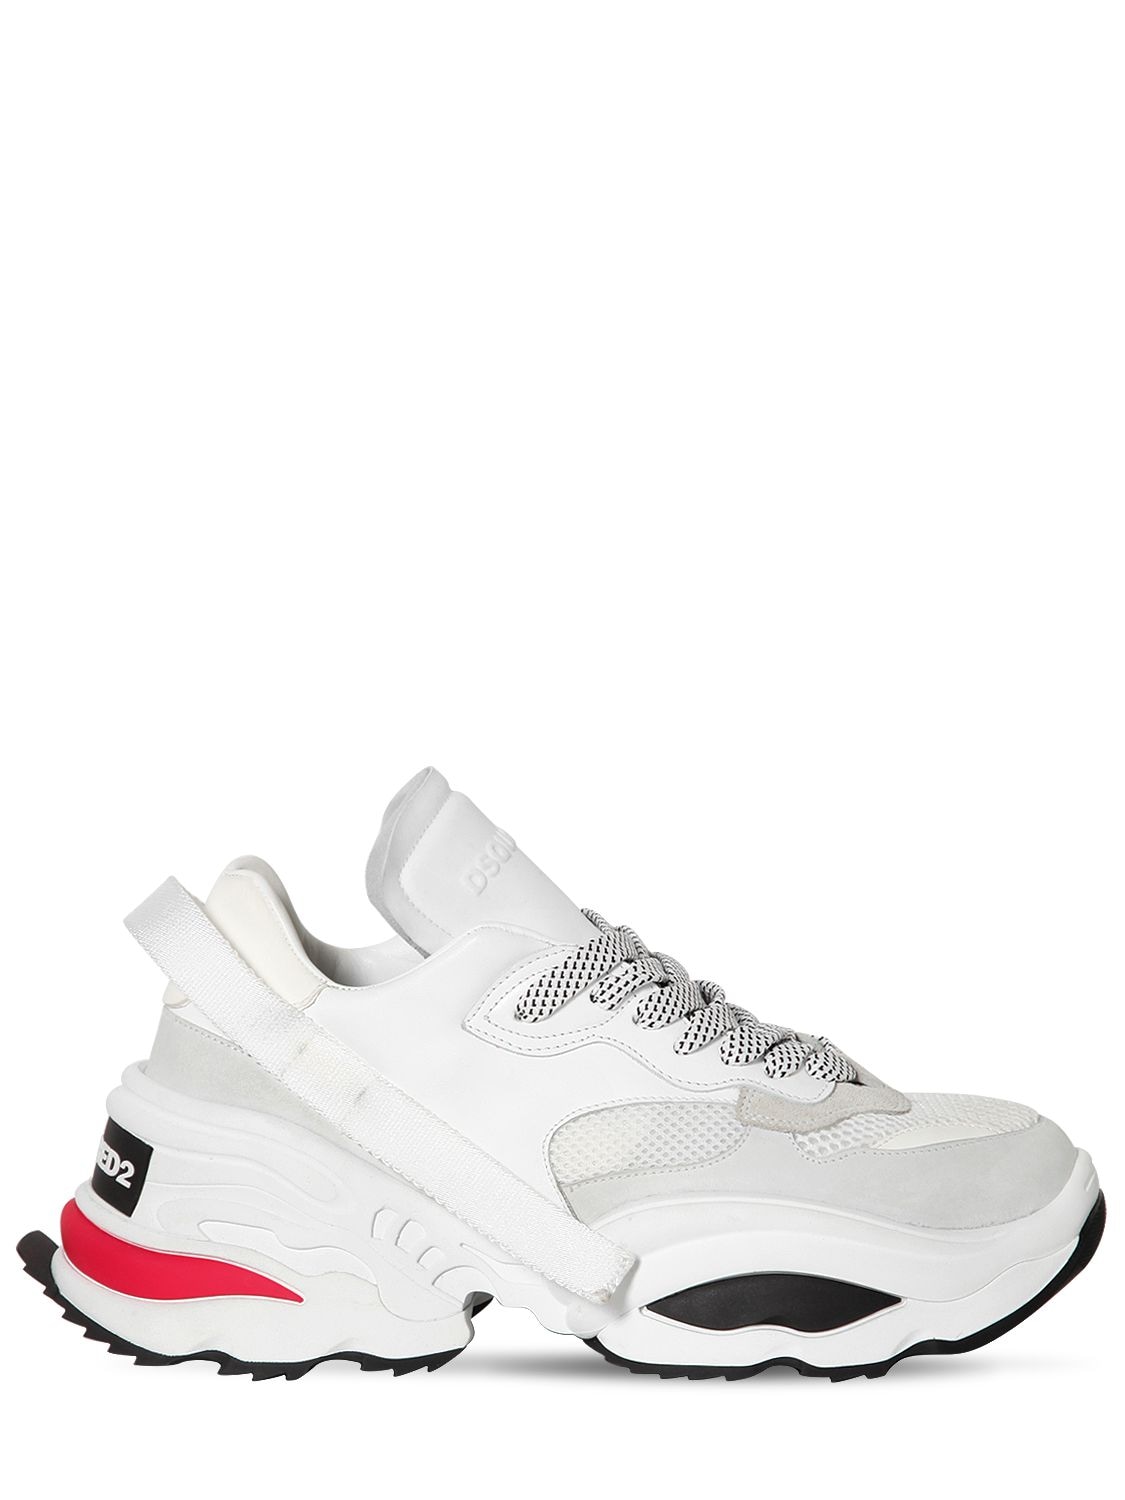 dsquared sneakers white